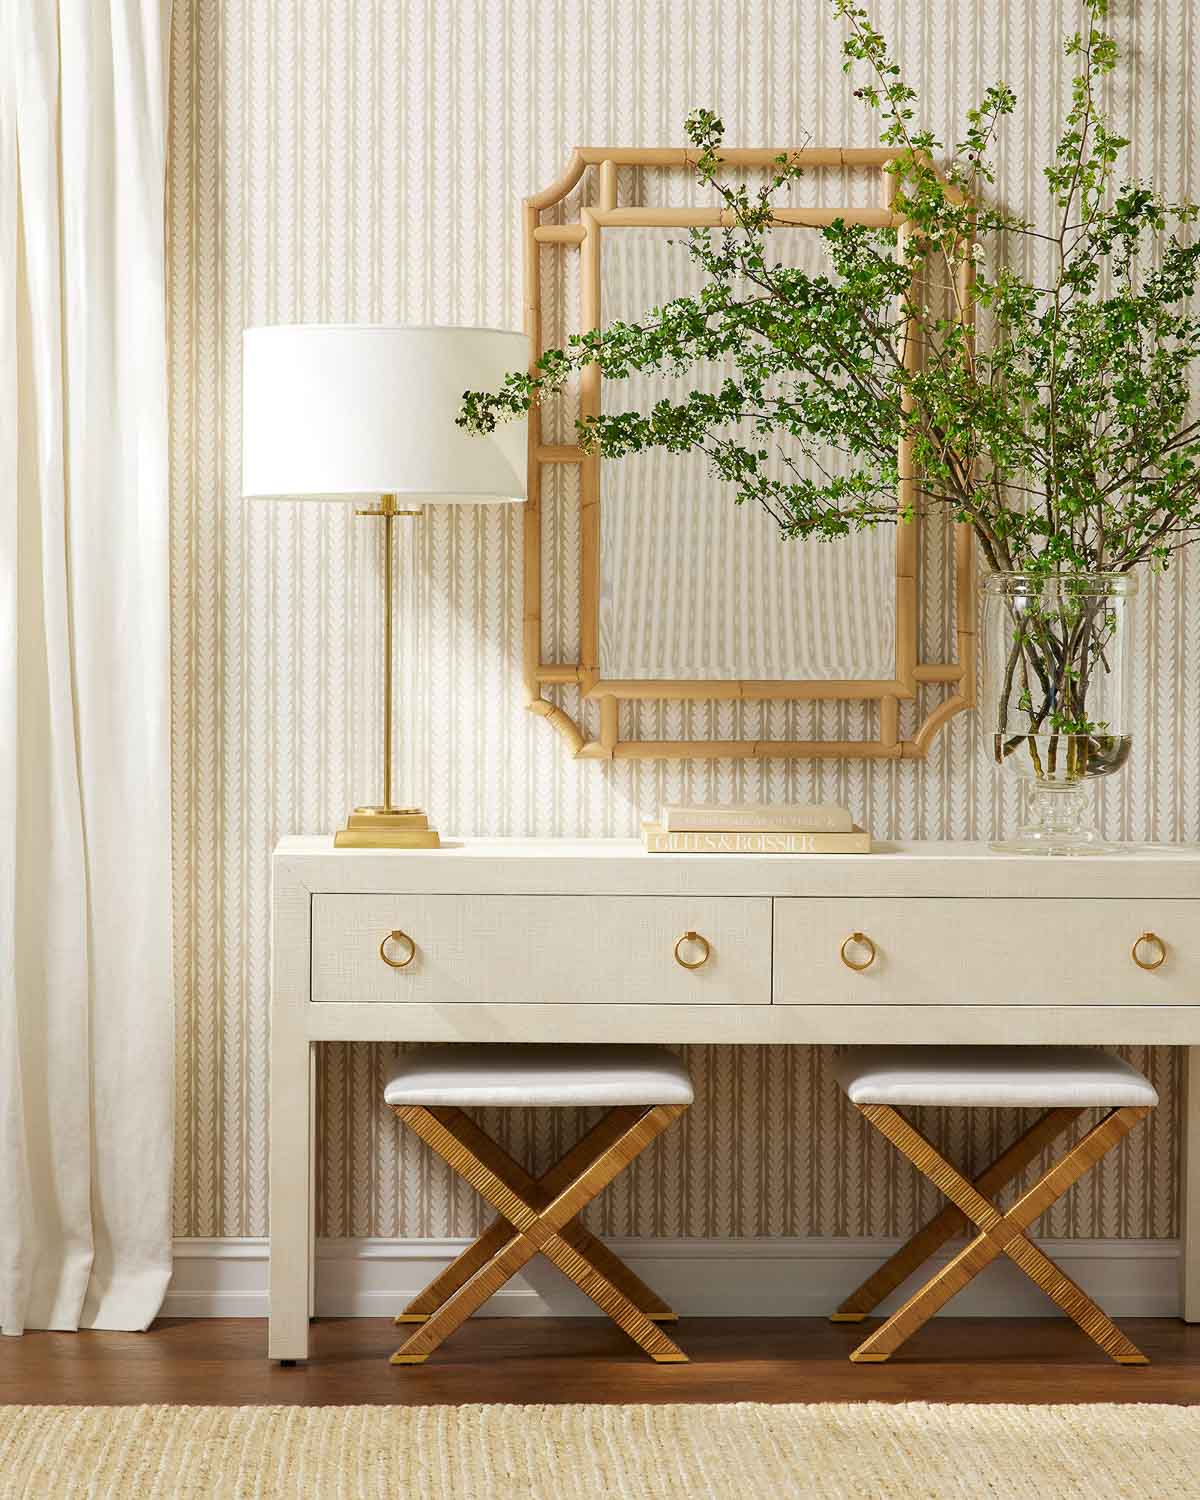 Console table decor - lamp, mirror, and greenery